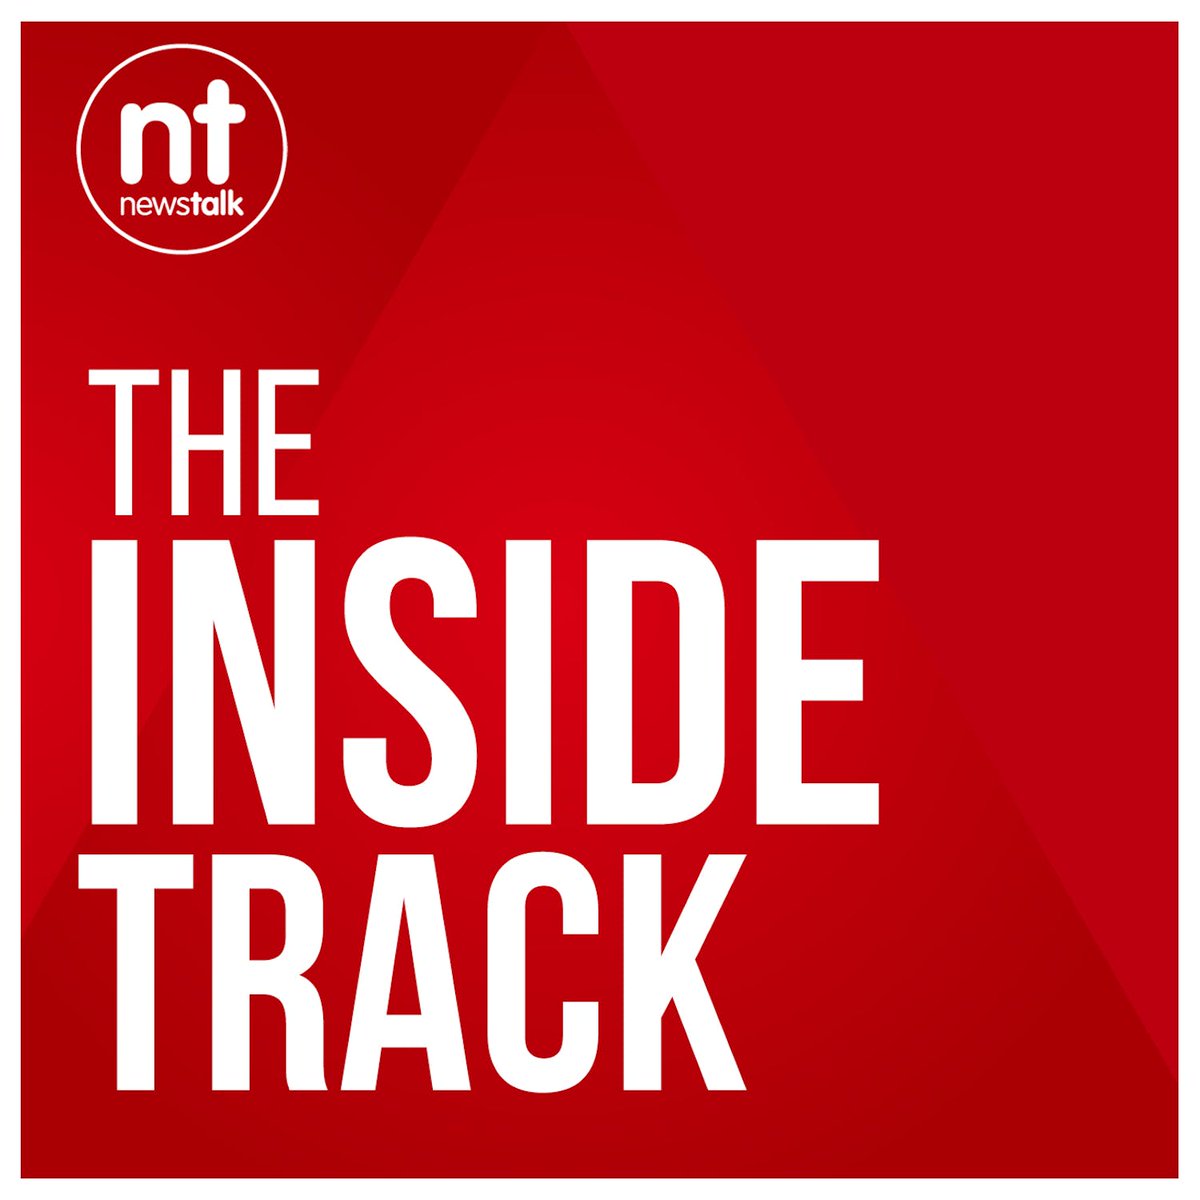 I will be presenting the Inside Track on @NewstalkFM tomorrow from 4 - 6pm - yes you read that correctly -  presenting! Send thoughts and prayers! 
#newstalkfm #TheInsideTrack